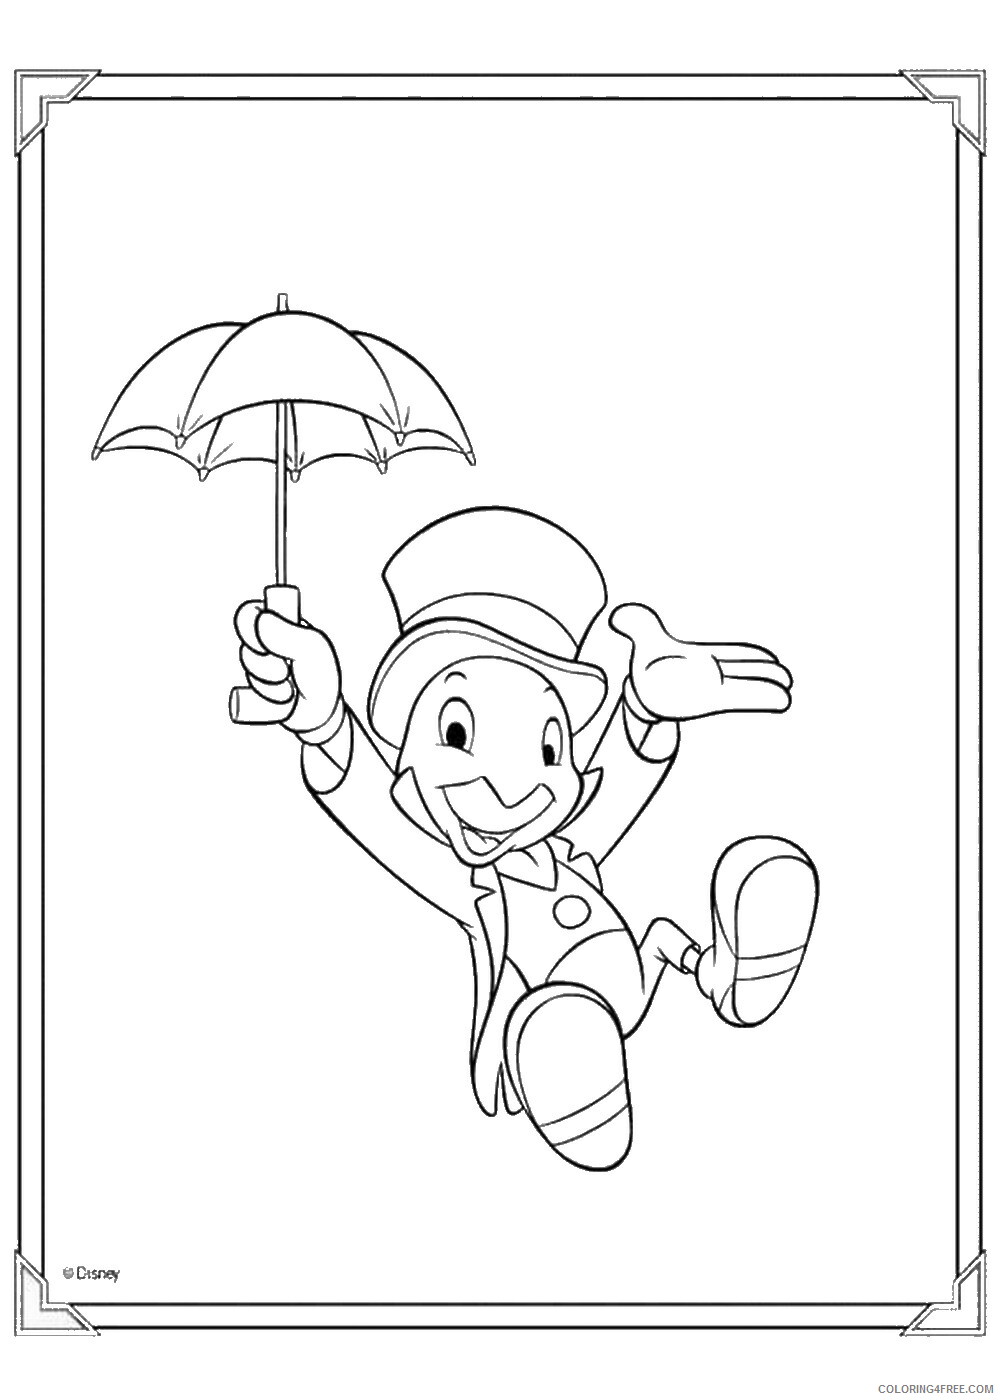 Pinocchio Coloring Pages TV Film Pinocchio_coloring_171 Printable 2020 06330 Coloring4free